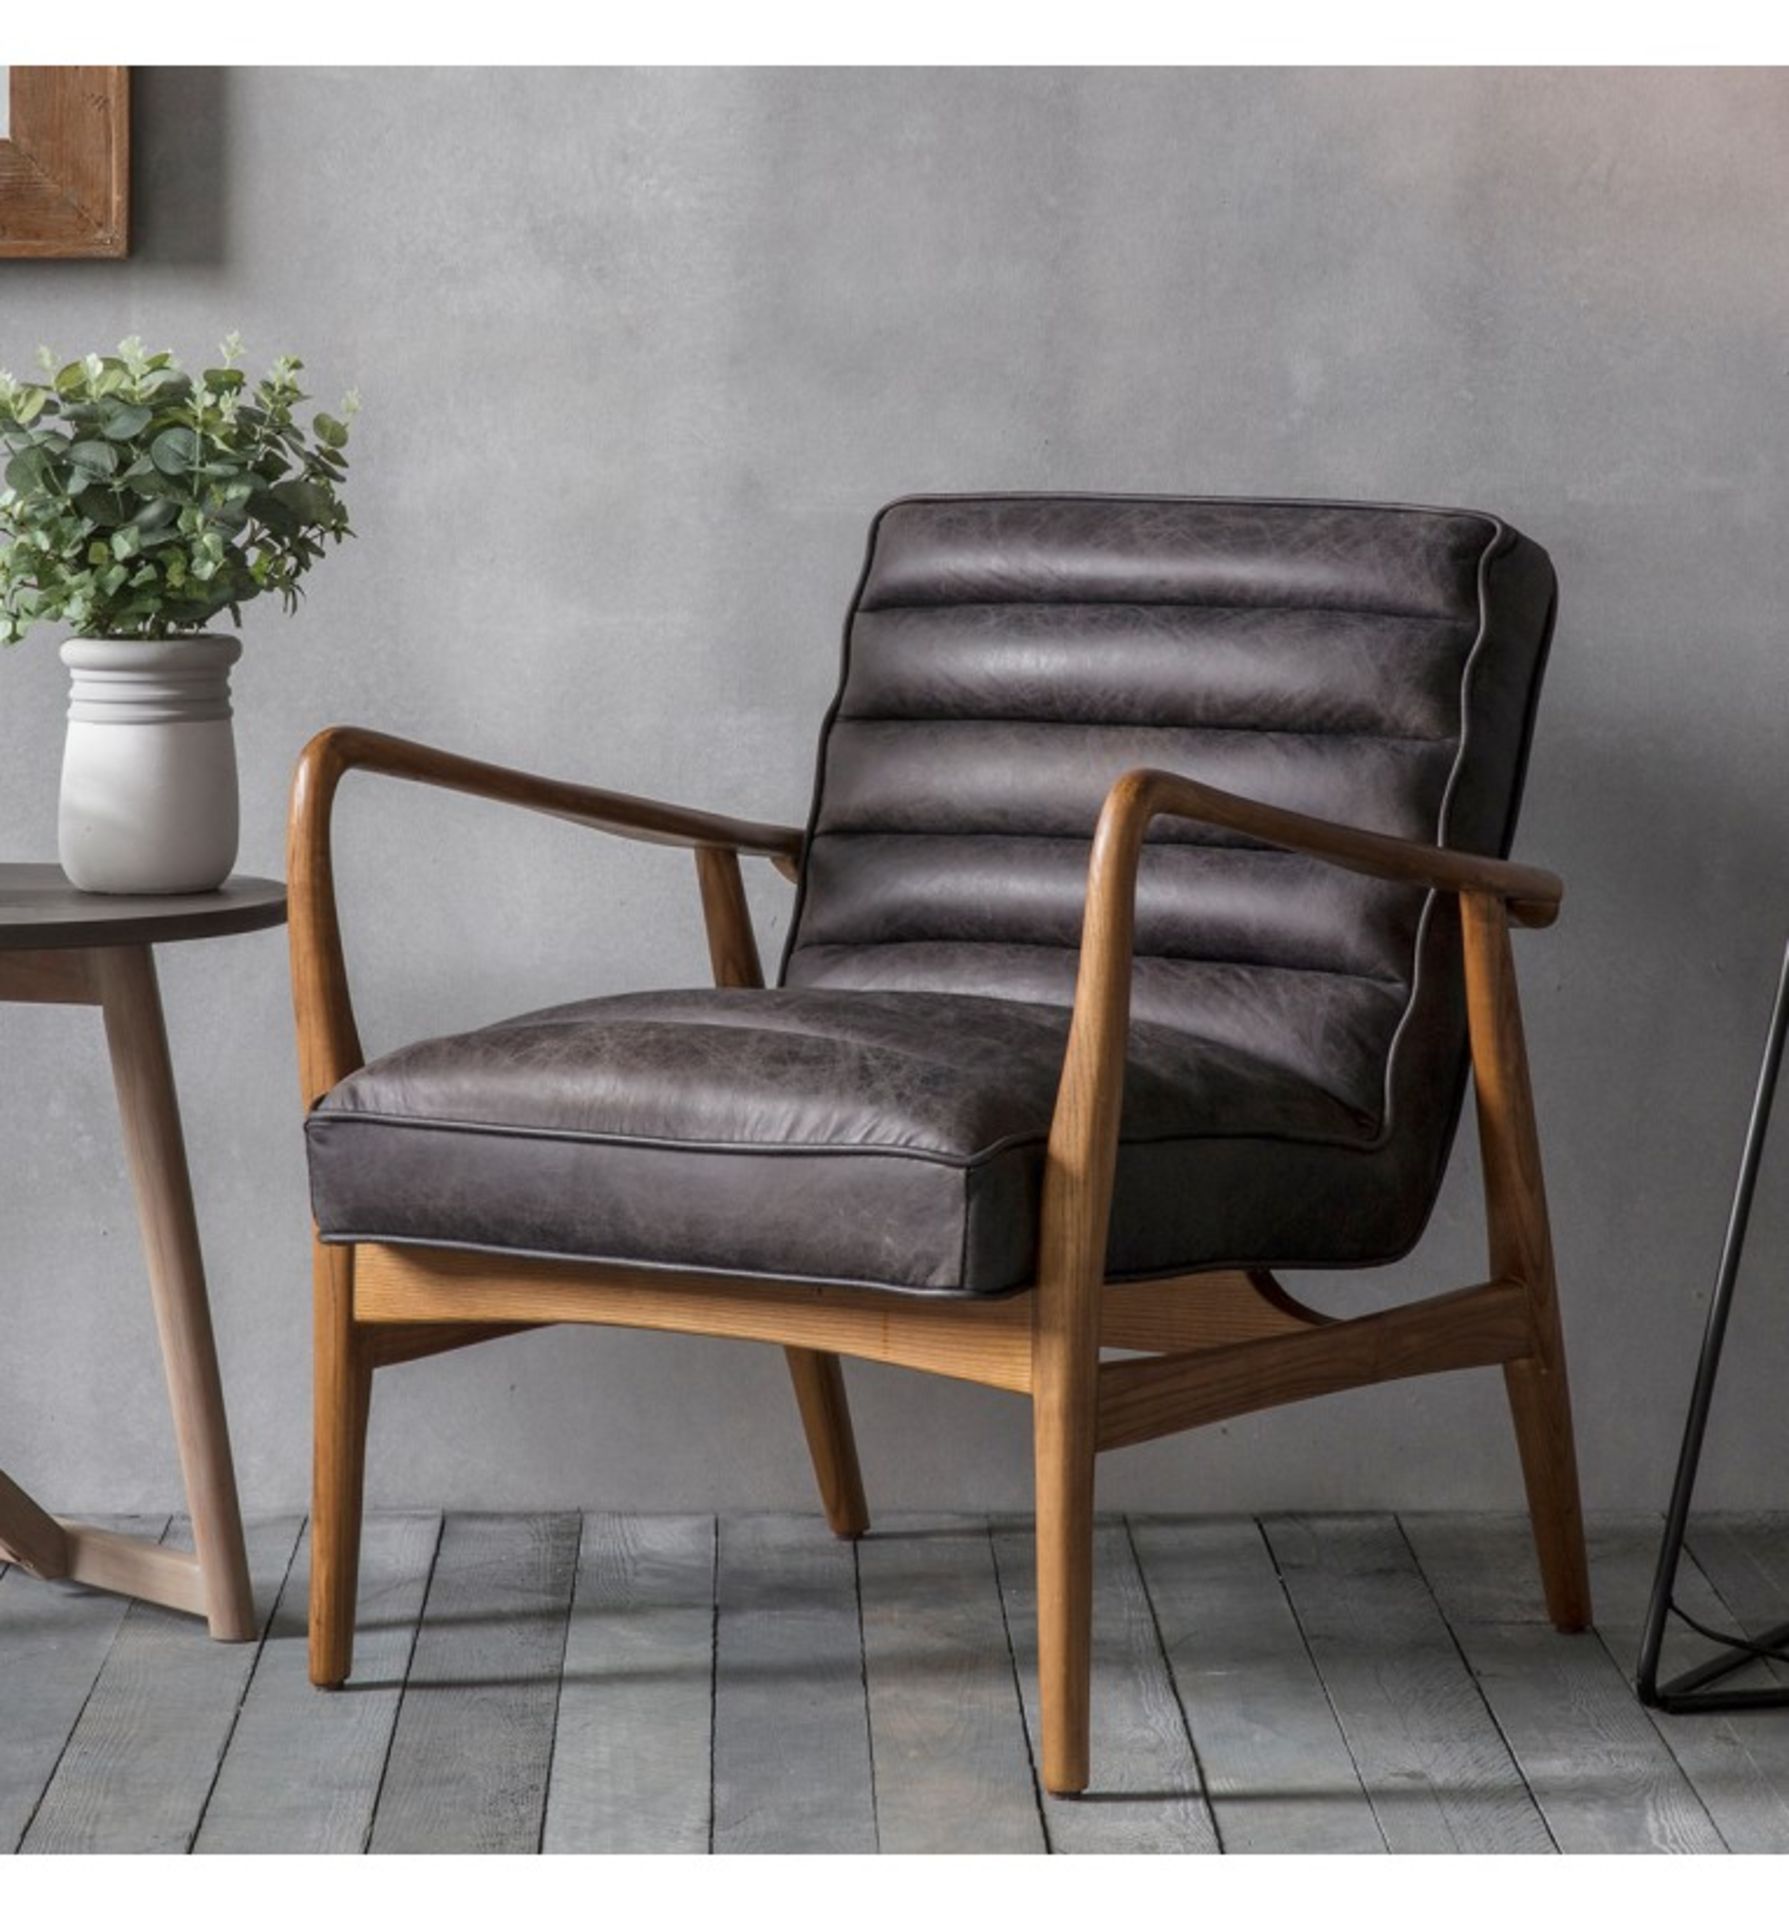 Datsun Armchair Antique Ebony Leather Stylish mid-century design in top grain leather in an